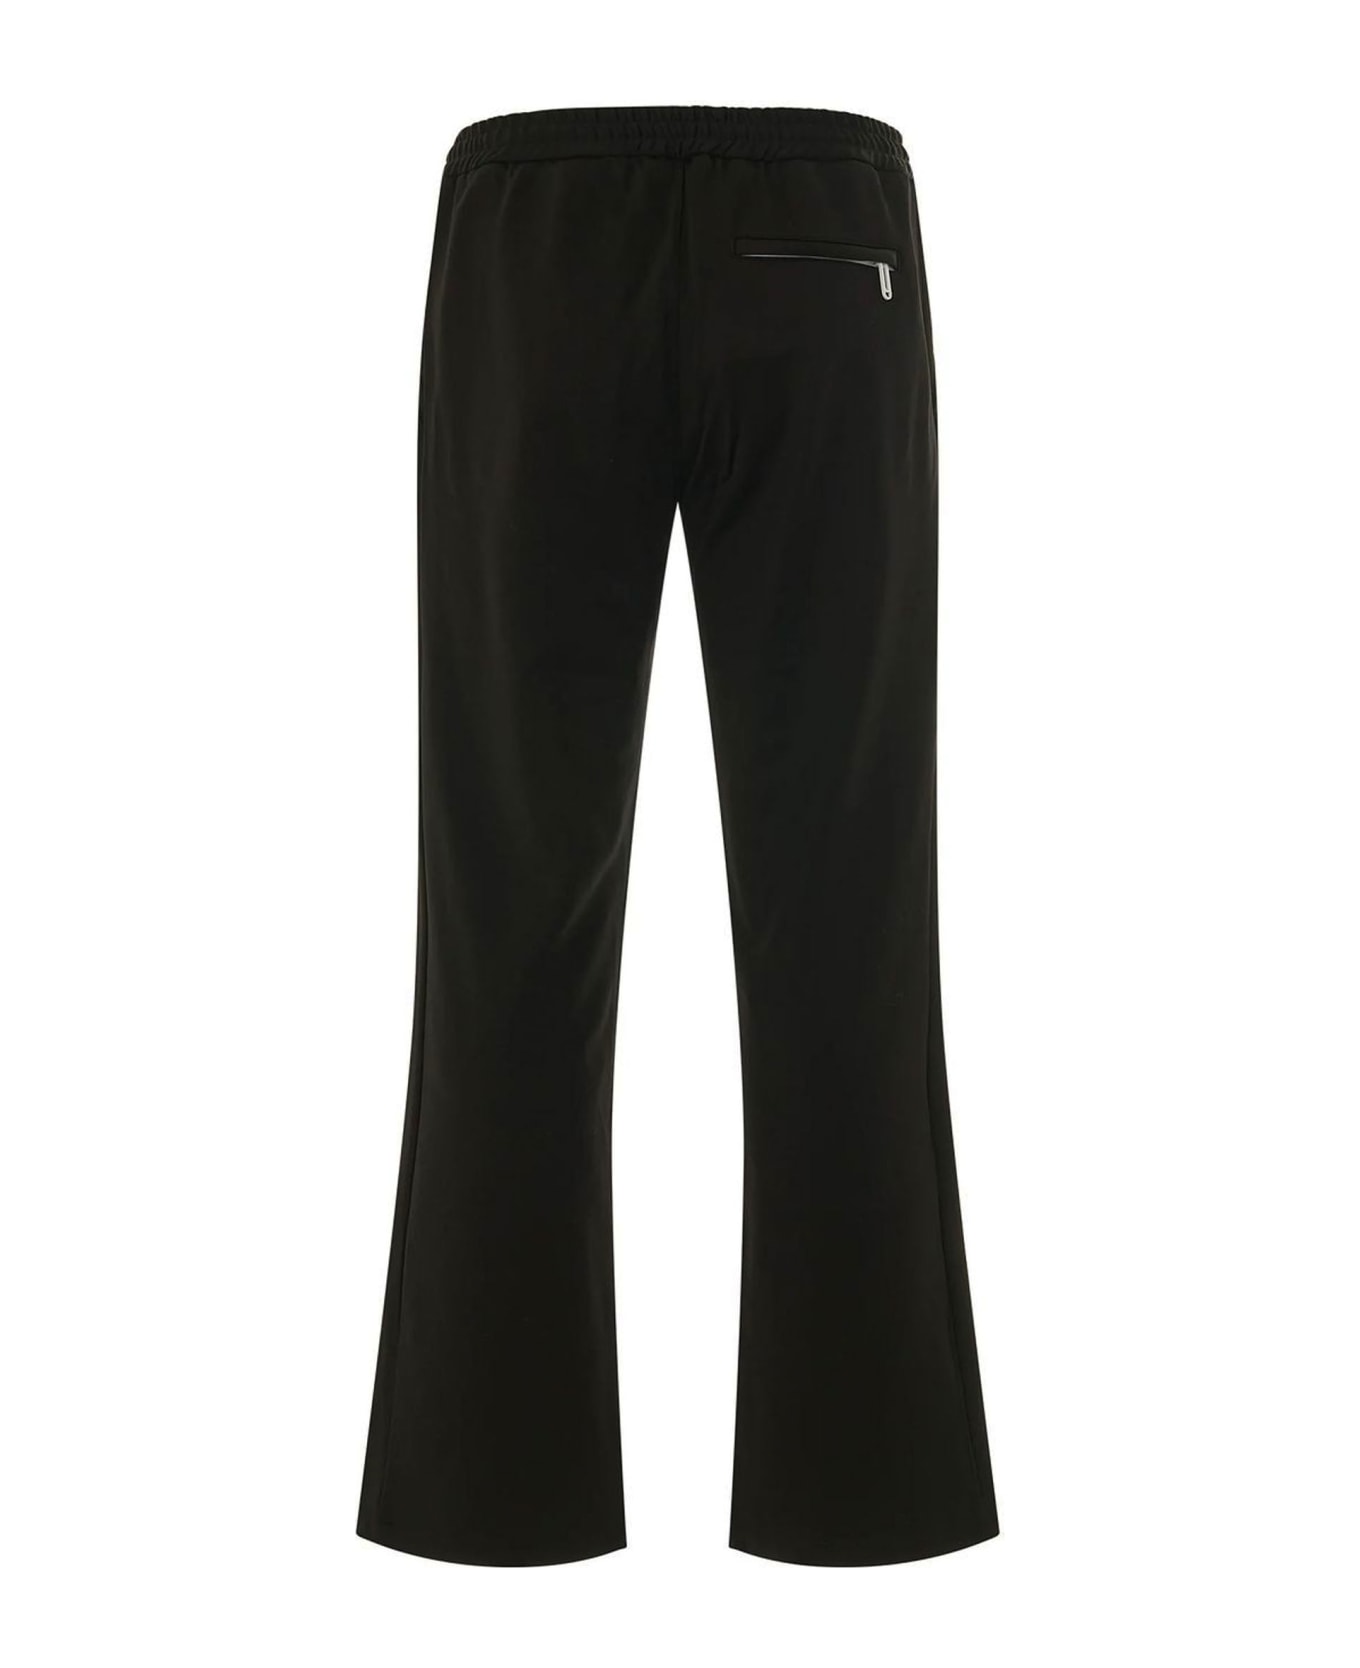 Off-White Track Trousers - Black White